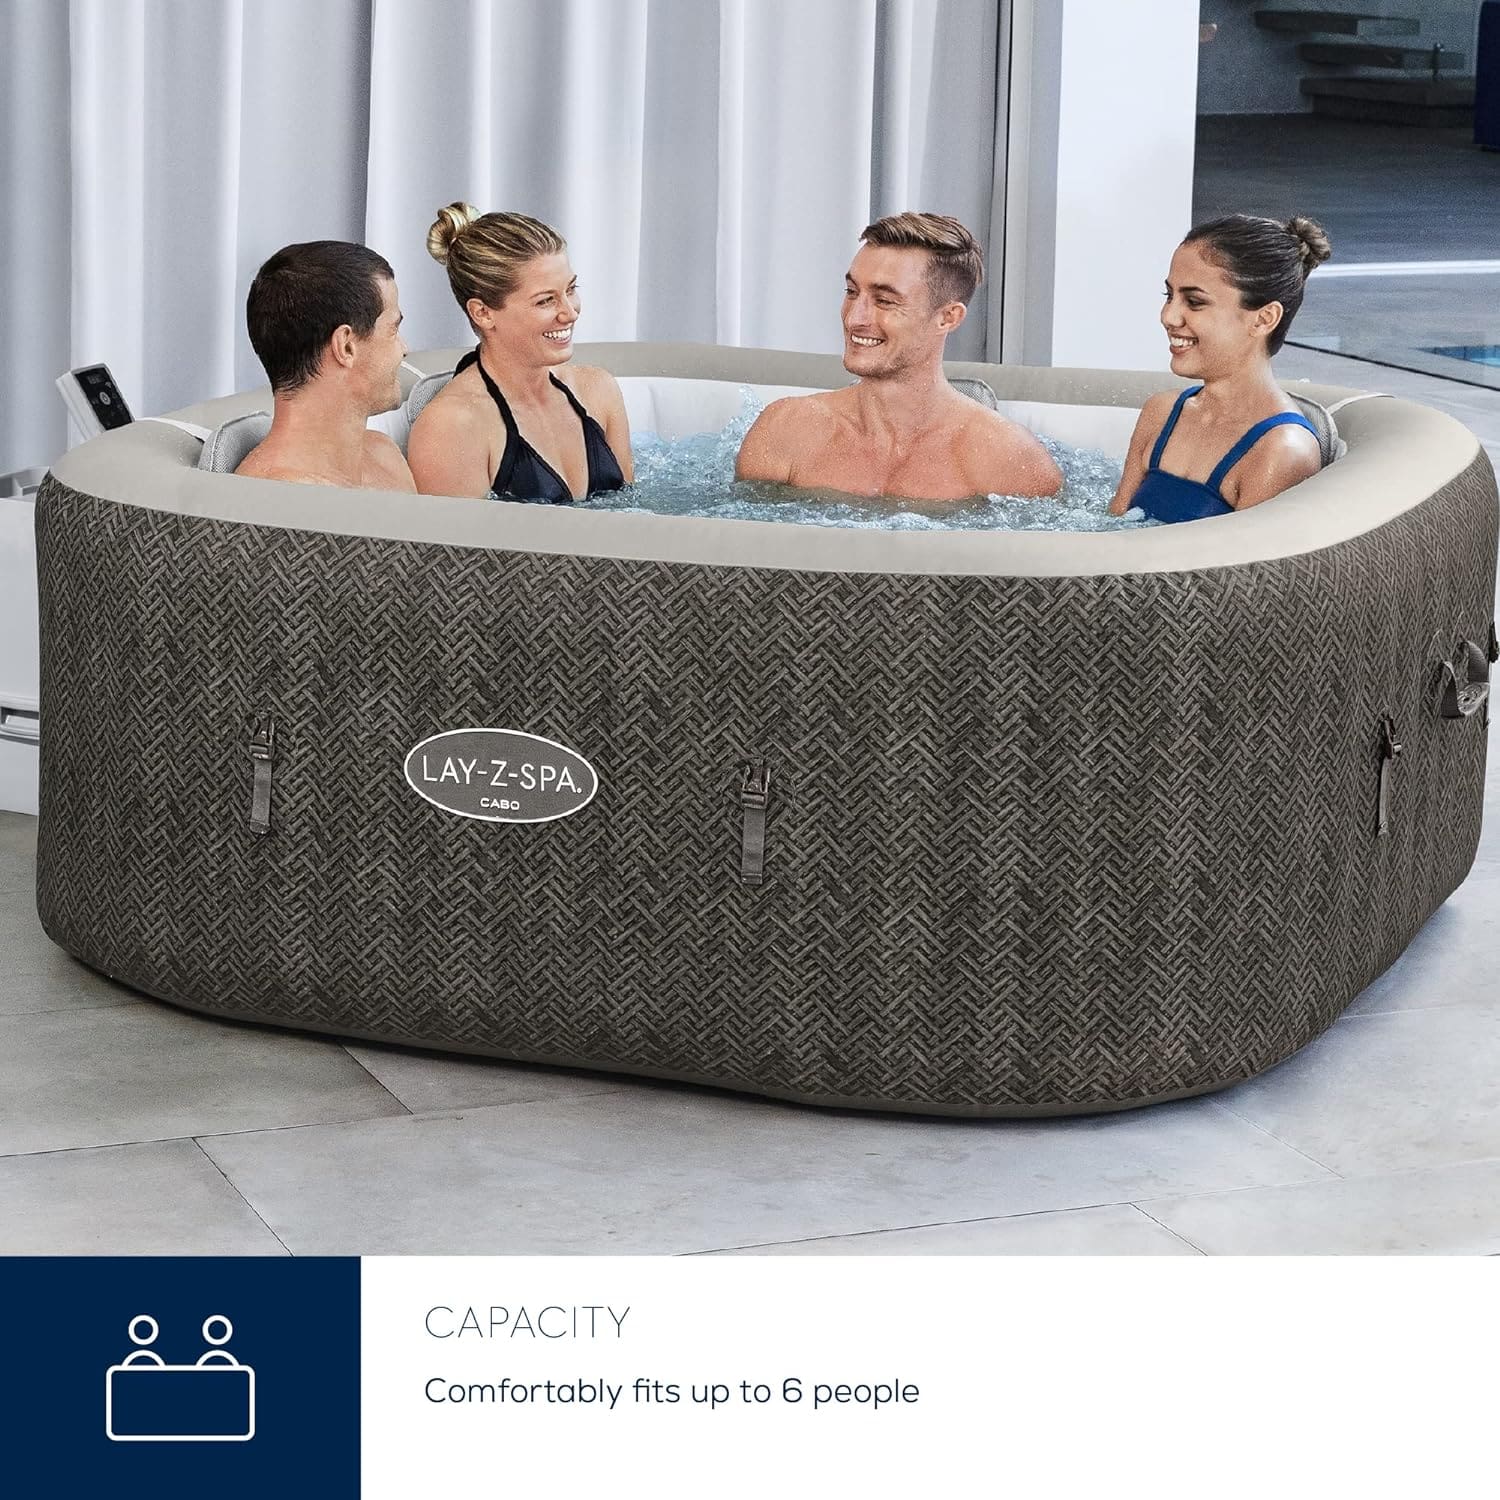 Lay-Z-spa Cabo Hydrojet Hot Tub - 4-6 person